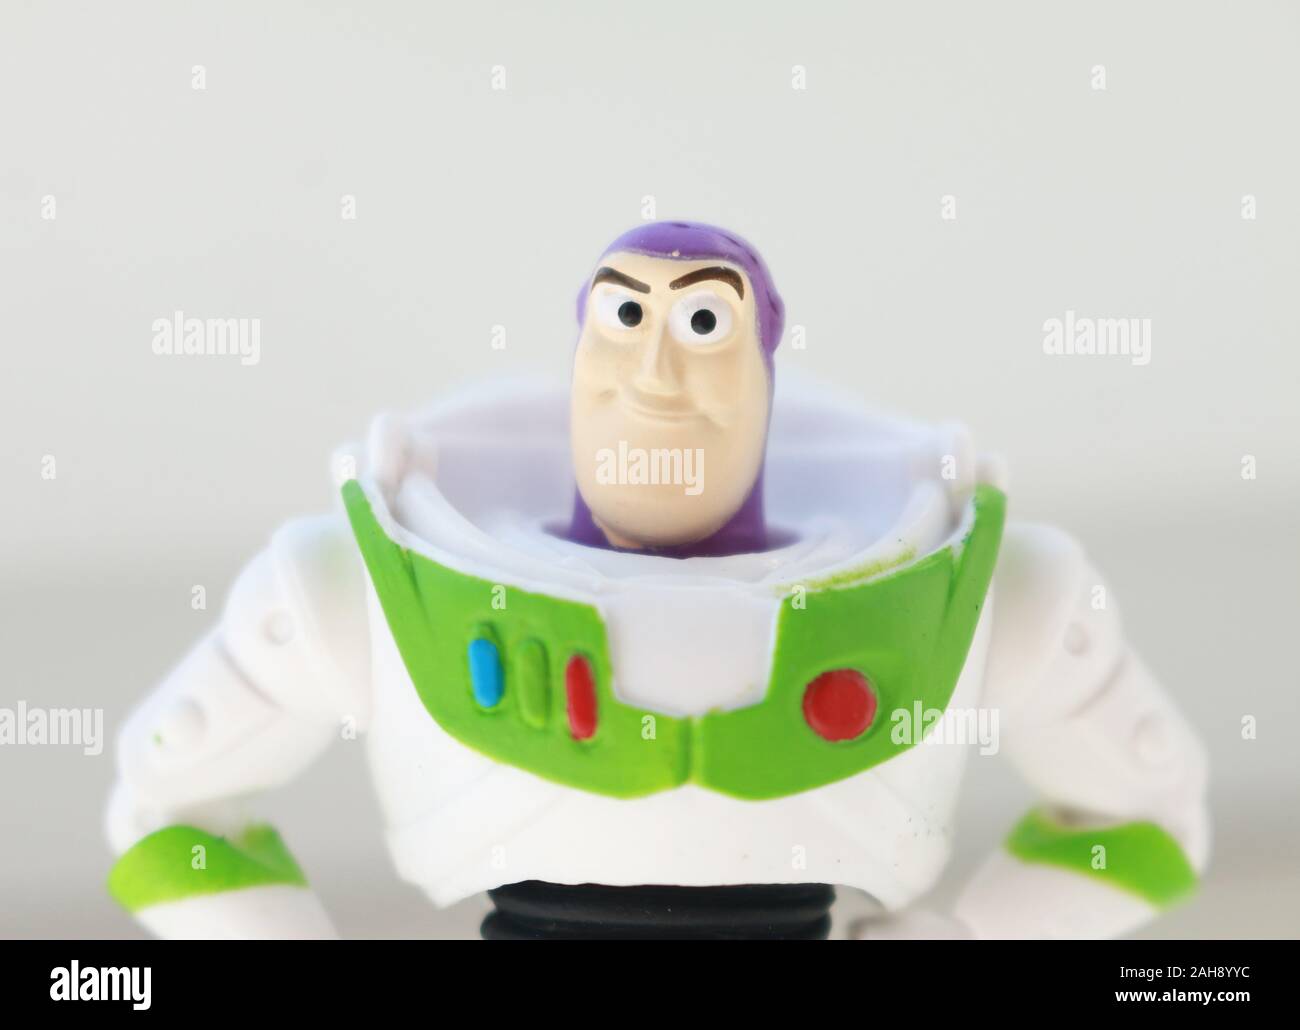 Toy figurine of Buzz Lightyear. Buzz Lightyear is a fictional character in the Toy Story franchise. Stock Photo